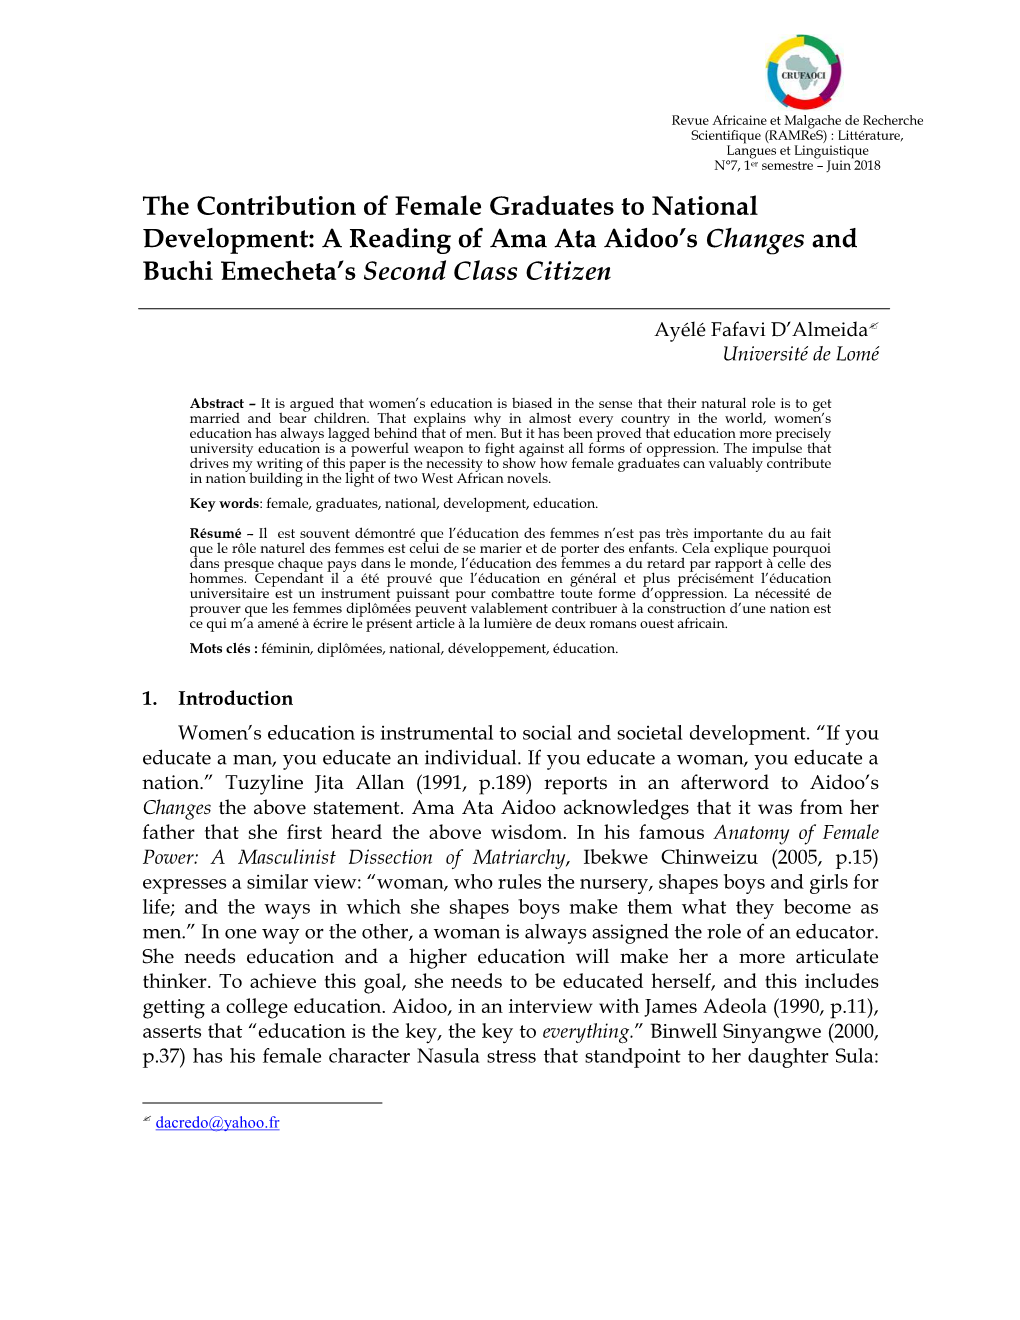 The Contribution of Female Graduates to National Development: a Reading of Ama Ata Aidoo’S Changes and Buchi Emecheta’S Second Class Citizen